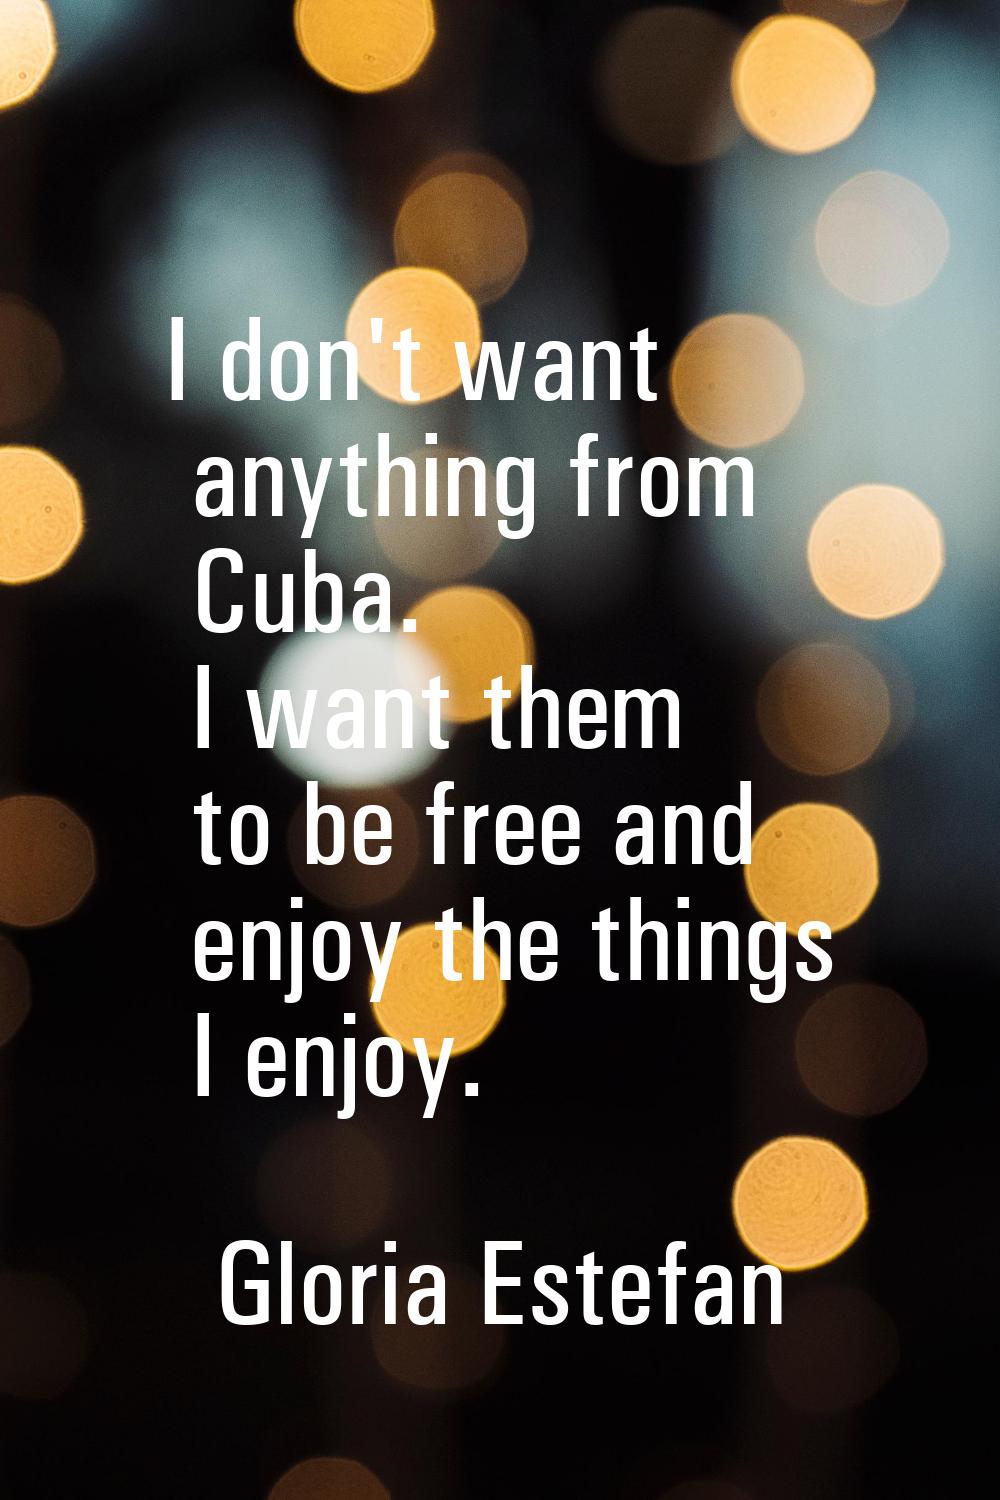 I don't want anything from Cuba. I want them to be free and enjoy the things I enjoy.